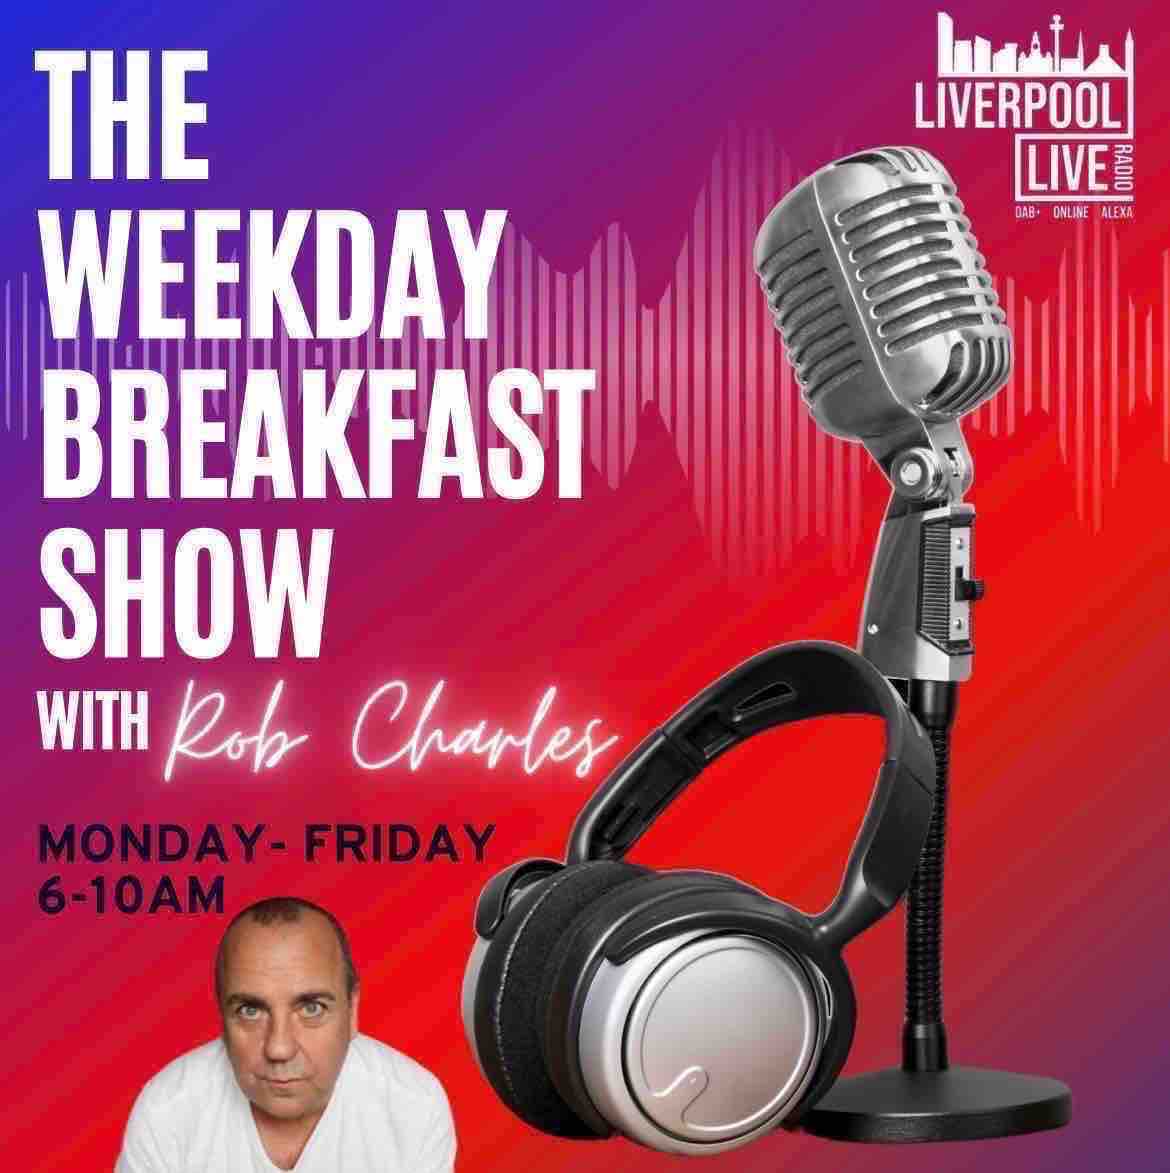 The liverpool live breakfast show with Rob Charles ….. Tune in for fun features including “Everyday is a School Day” Fasinating Facts and ‘Pointless Pop’ a game to get you thinking! DAB+ • SMART SPEAKER • ONLINE • FREEVIEW CH 277